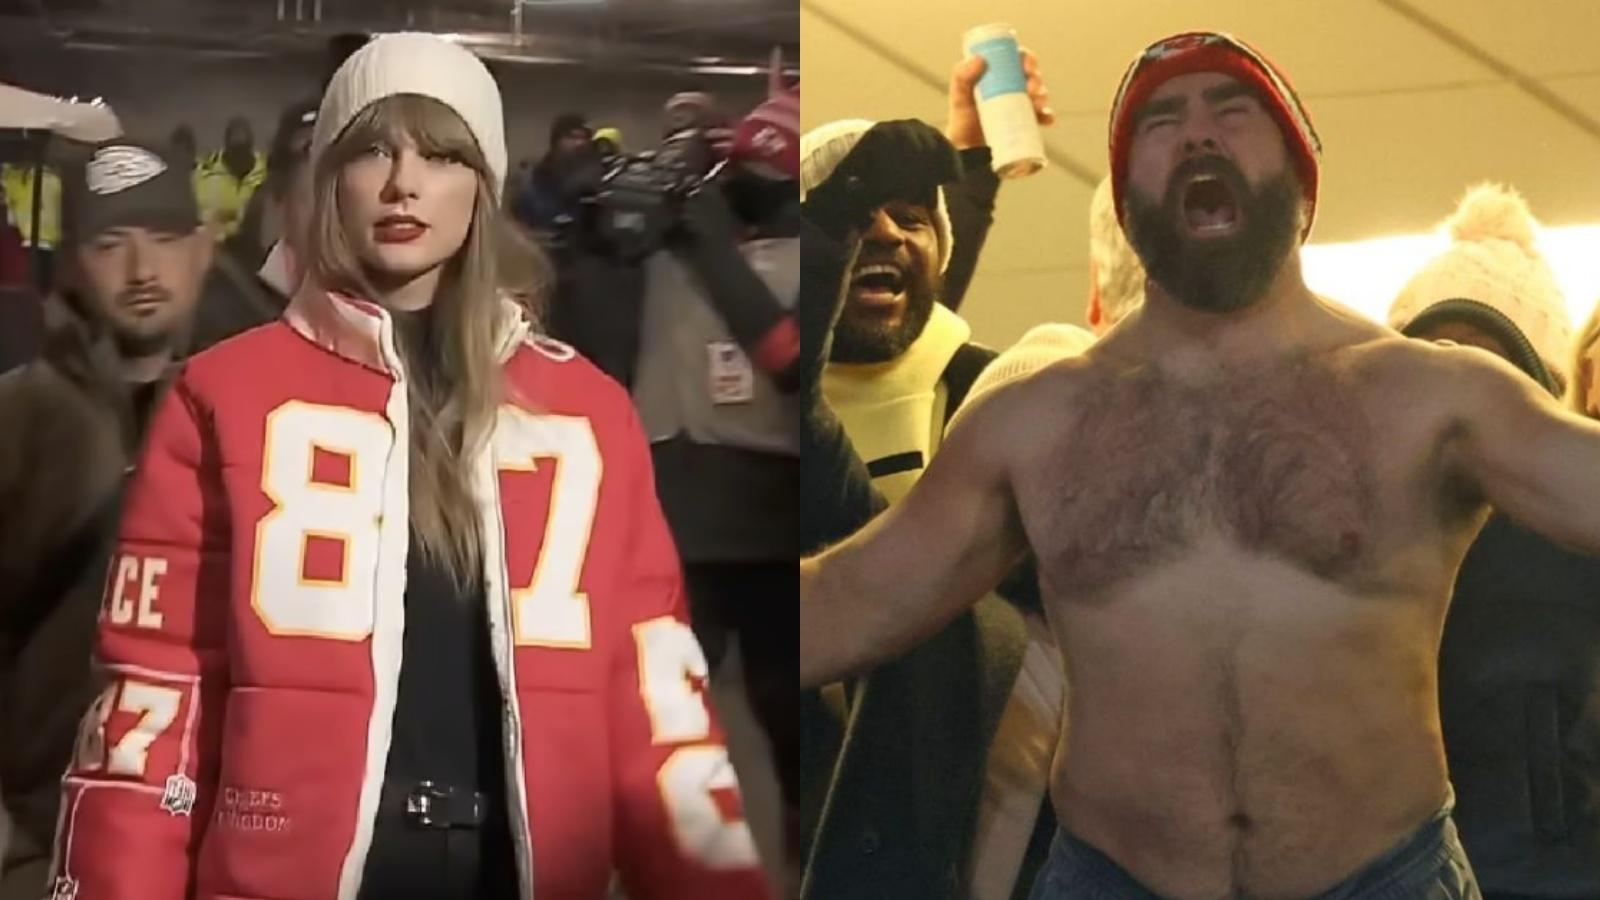 Taylor Swift and a shirtless Jason Kelce in a side-by-side photo